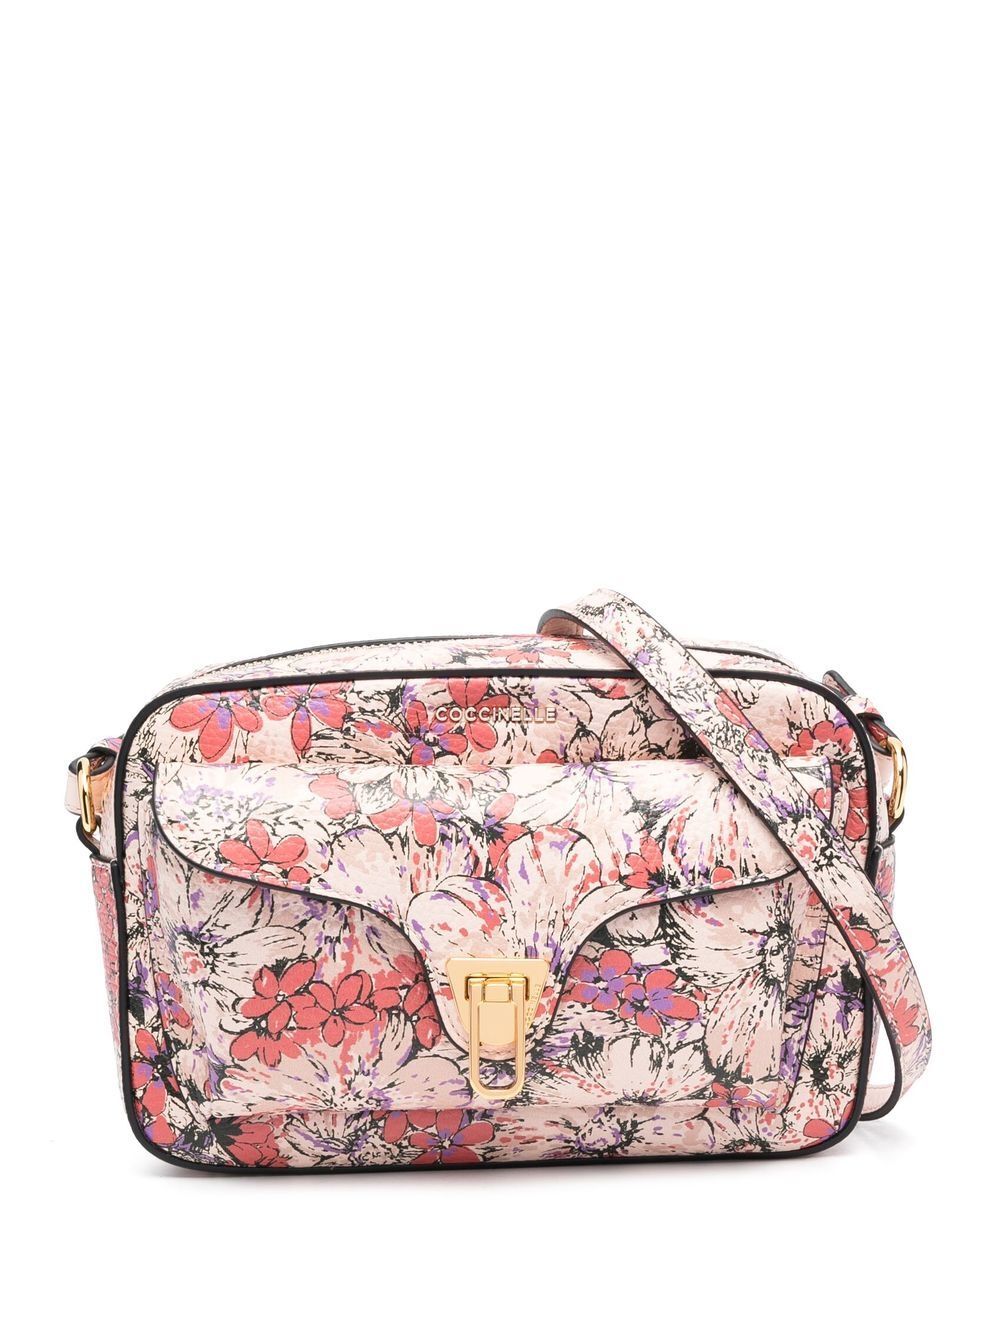 Coccinelle floral-print leather crossbody bag - Pink